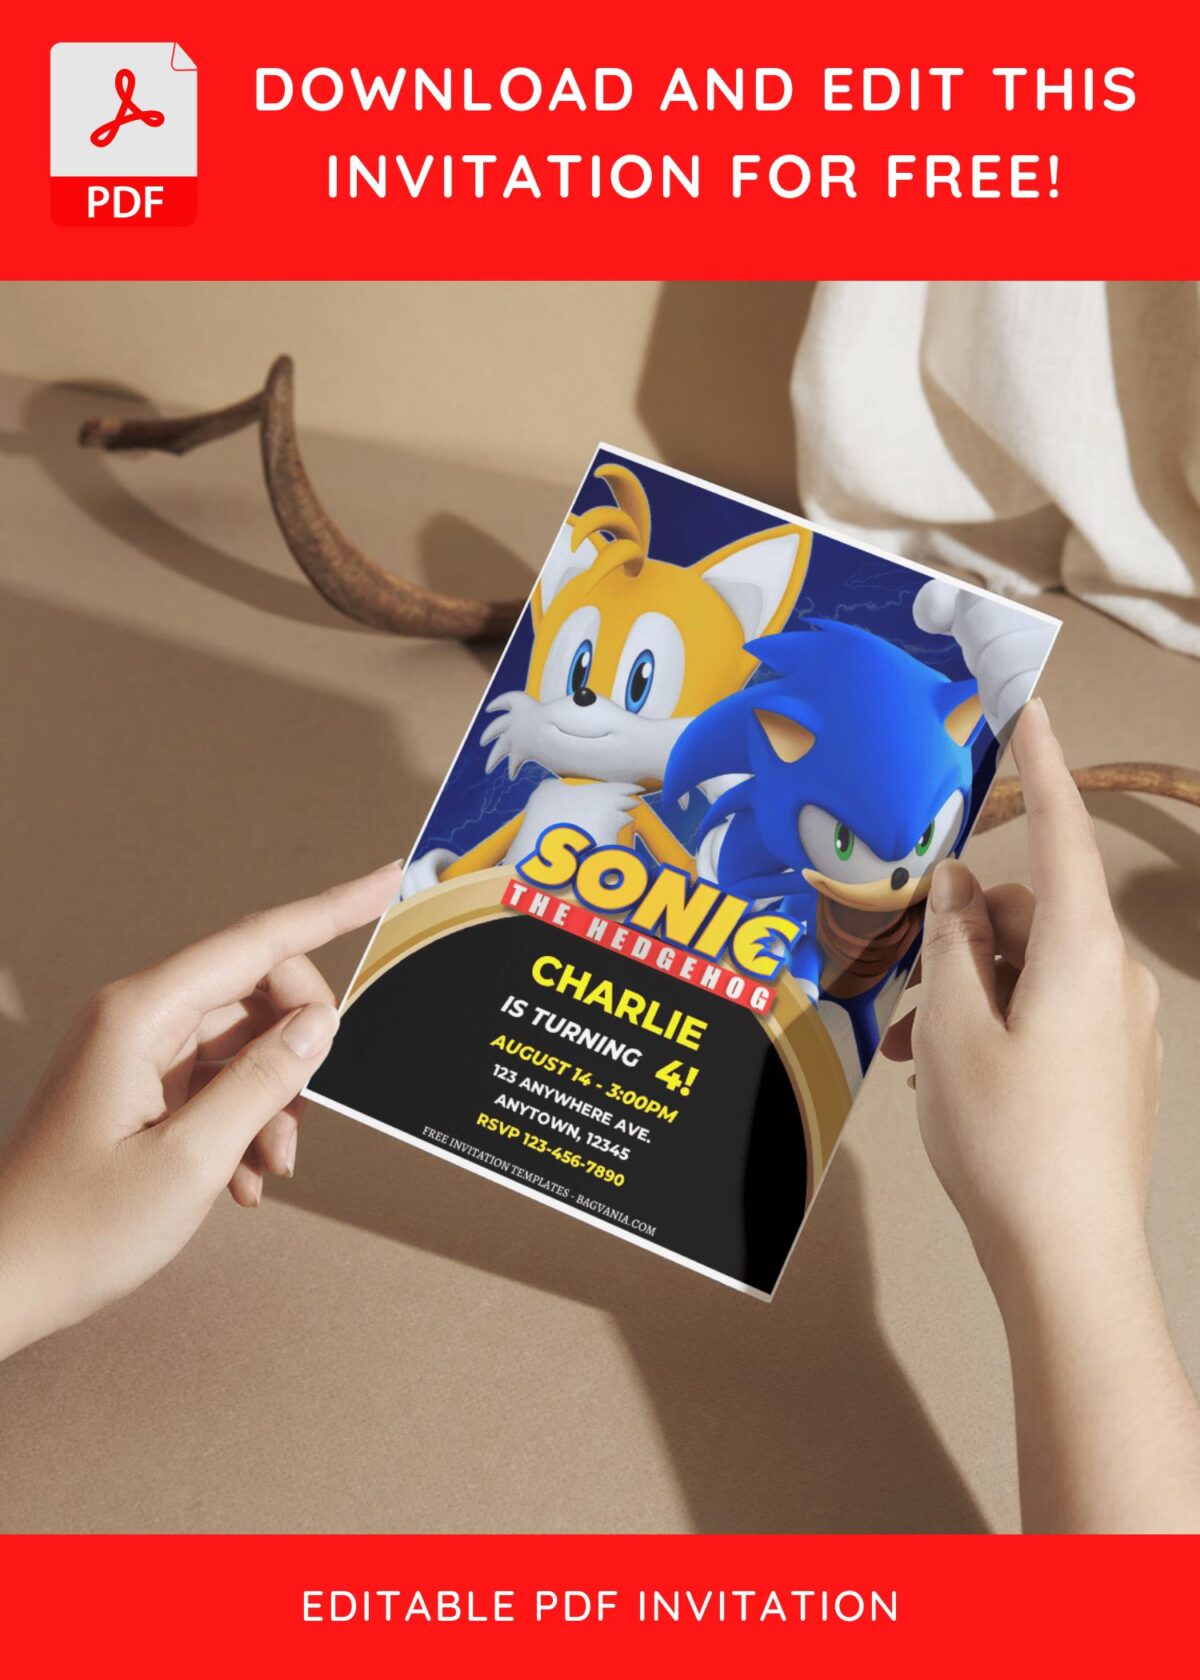 (Free Editable PDF) Blast From The Past Sonic Birthday Invitation Templates with Sonic dash